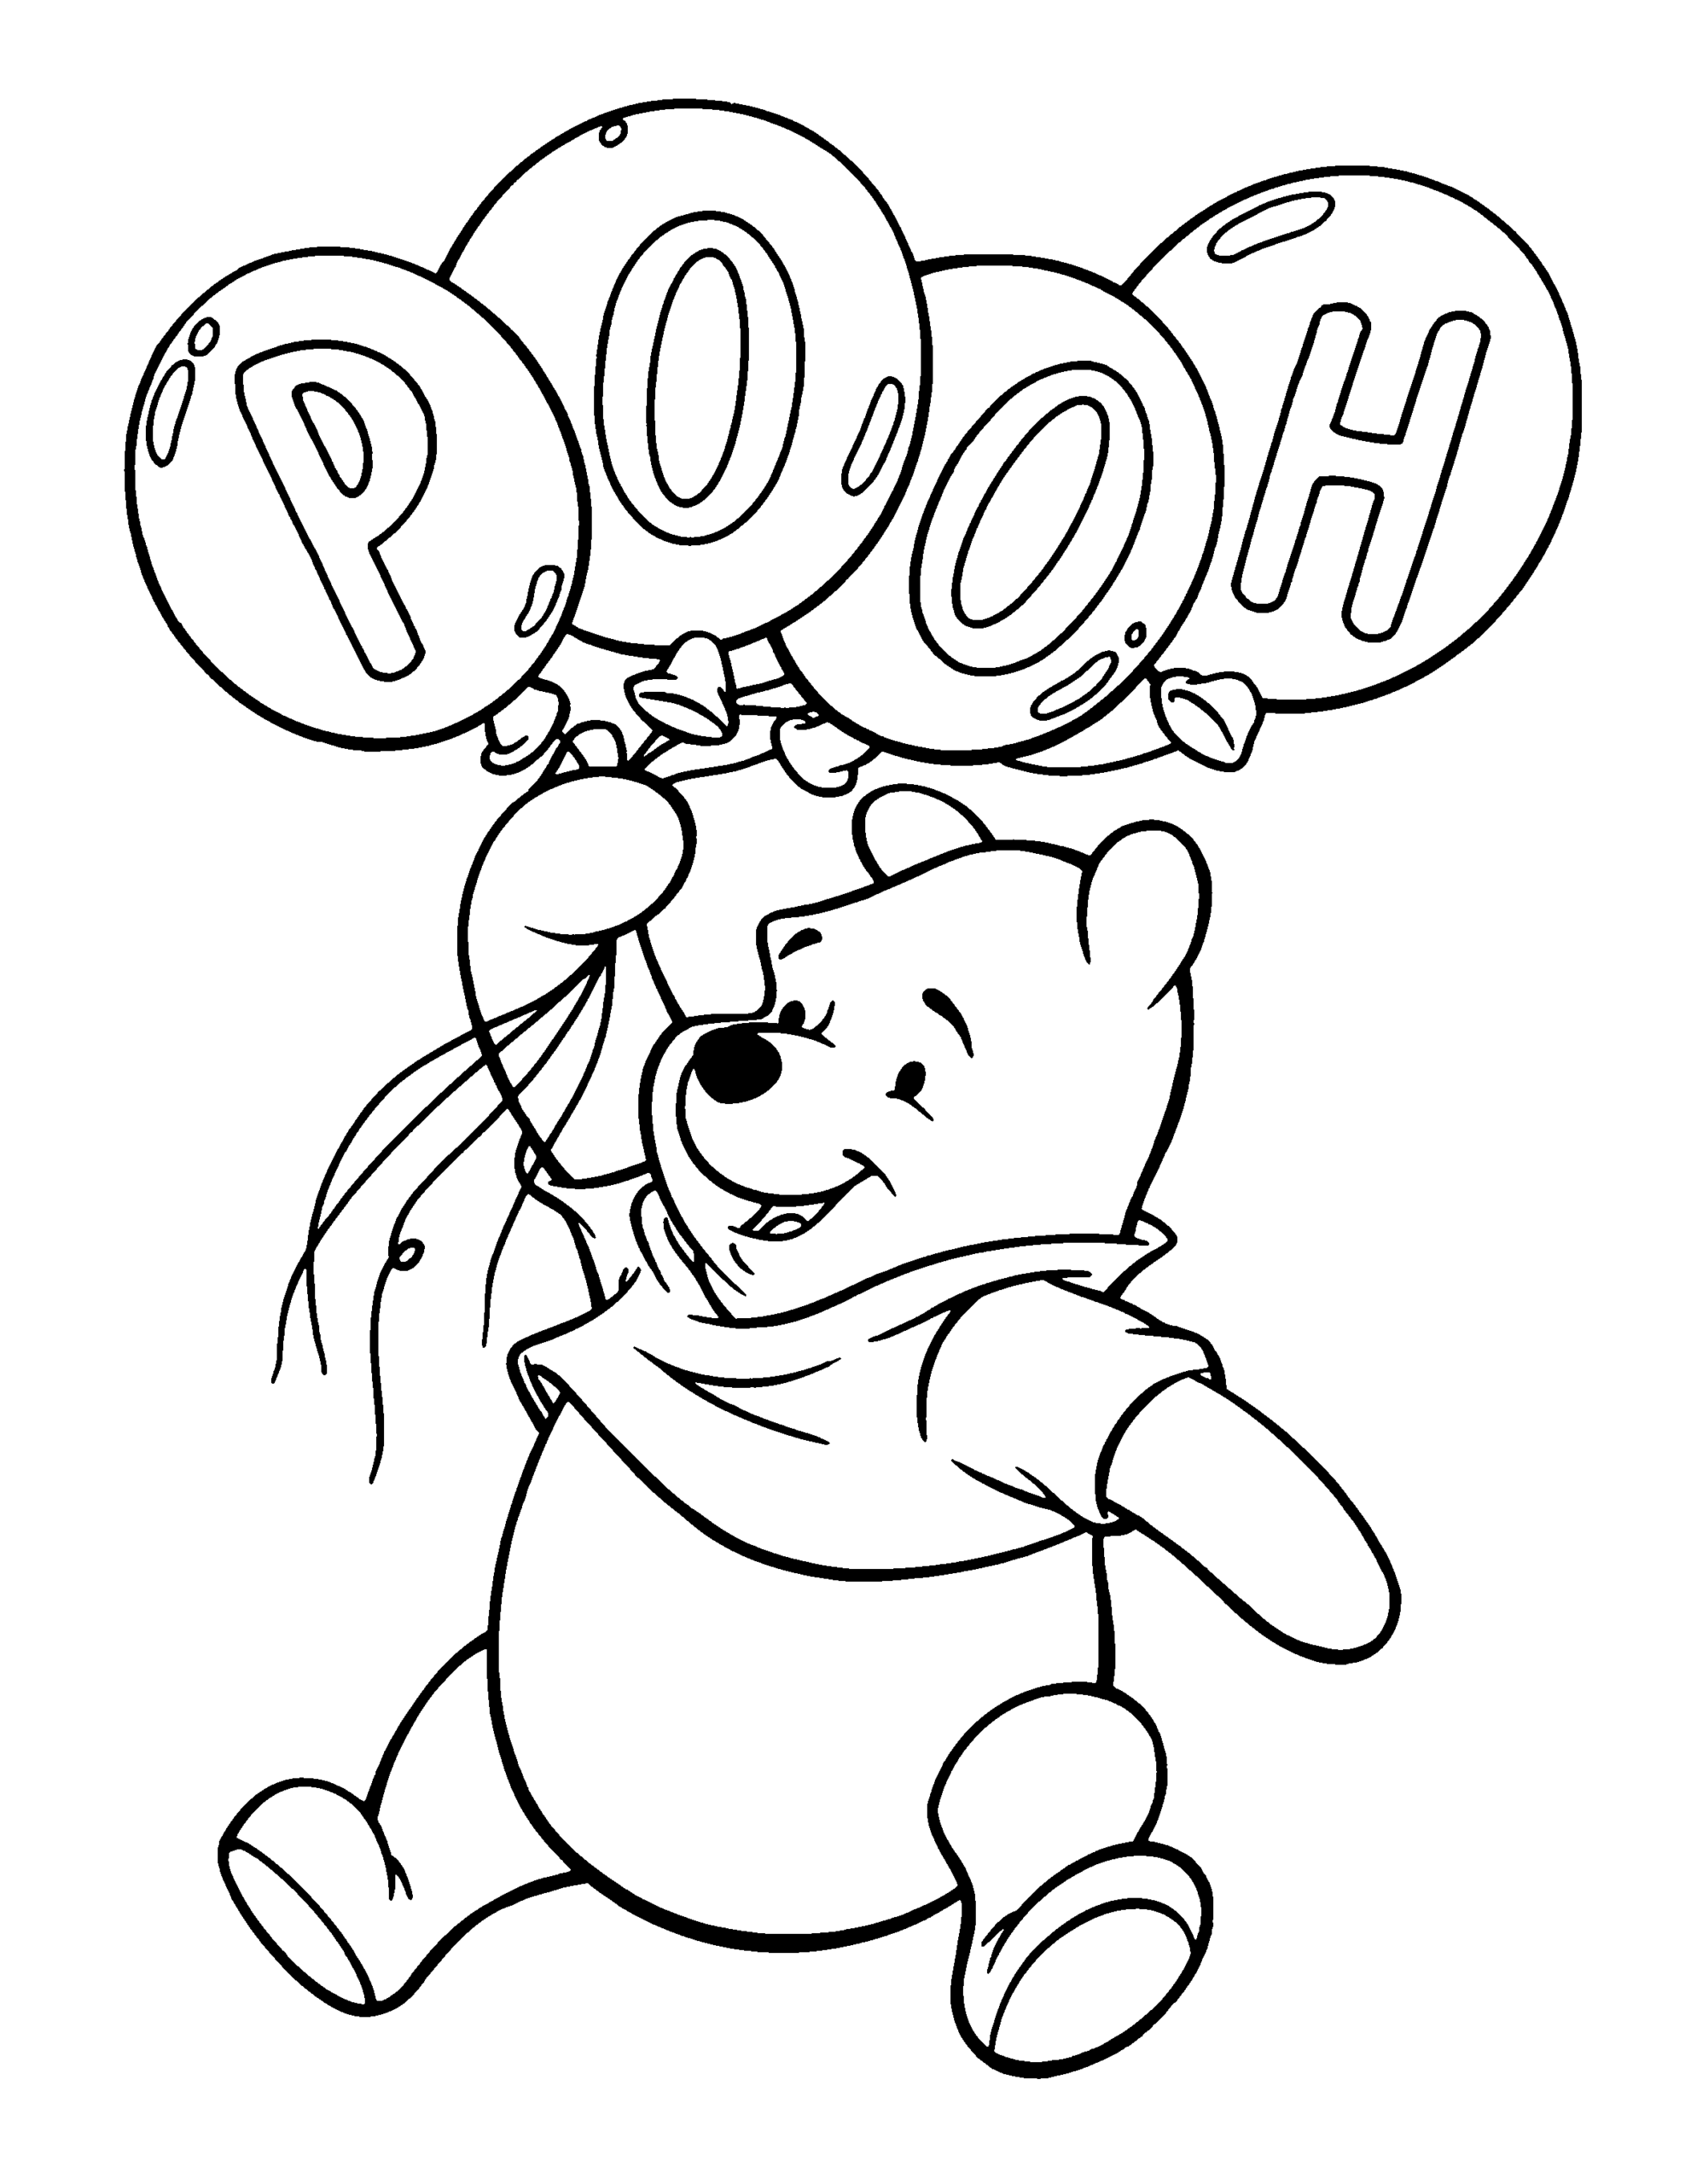 Winnie the Pooh Coloring Pages Cartoons_pooh with balloons a4 Printable 2020 6924 Coloring4free